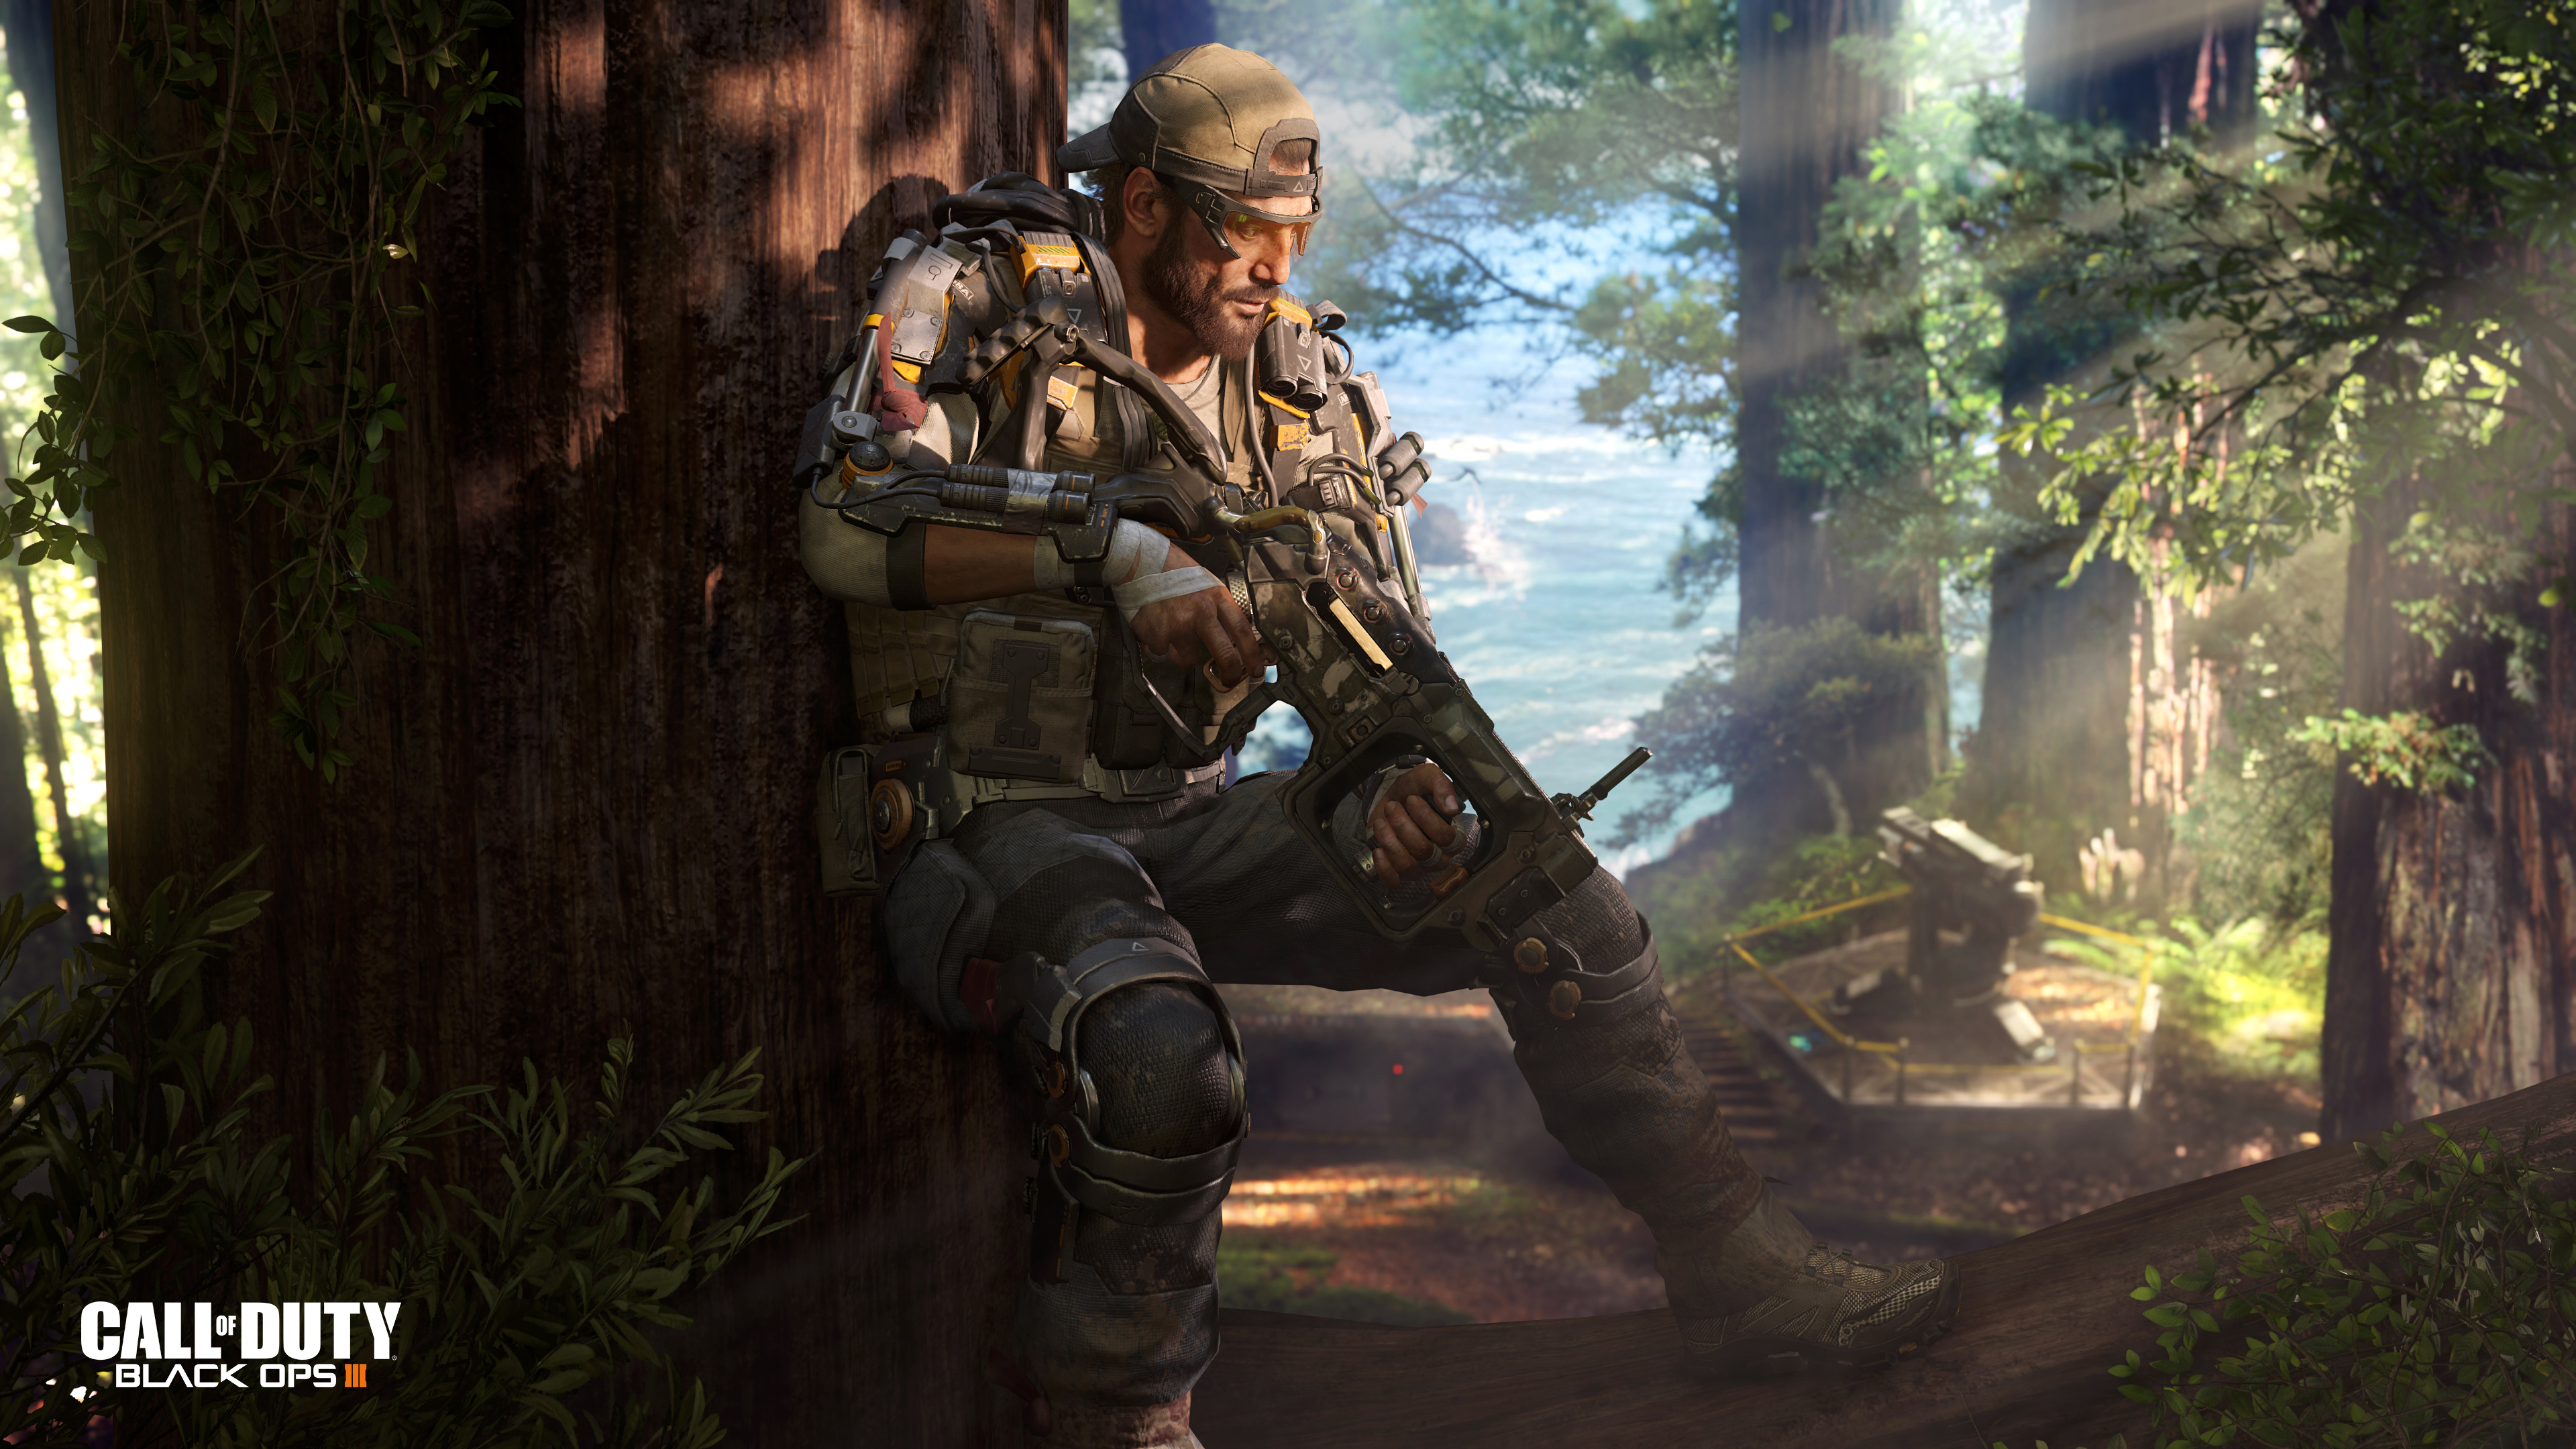 Call of Duty Black Ops 3 getting mod tools on PC but not